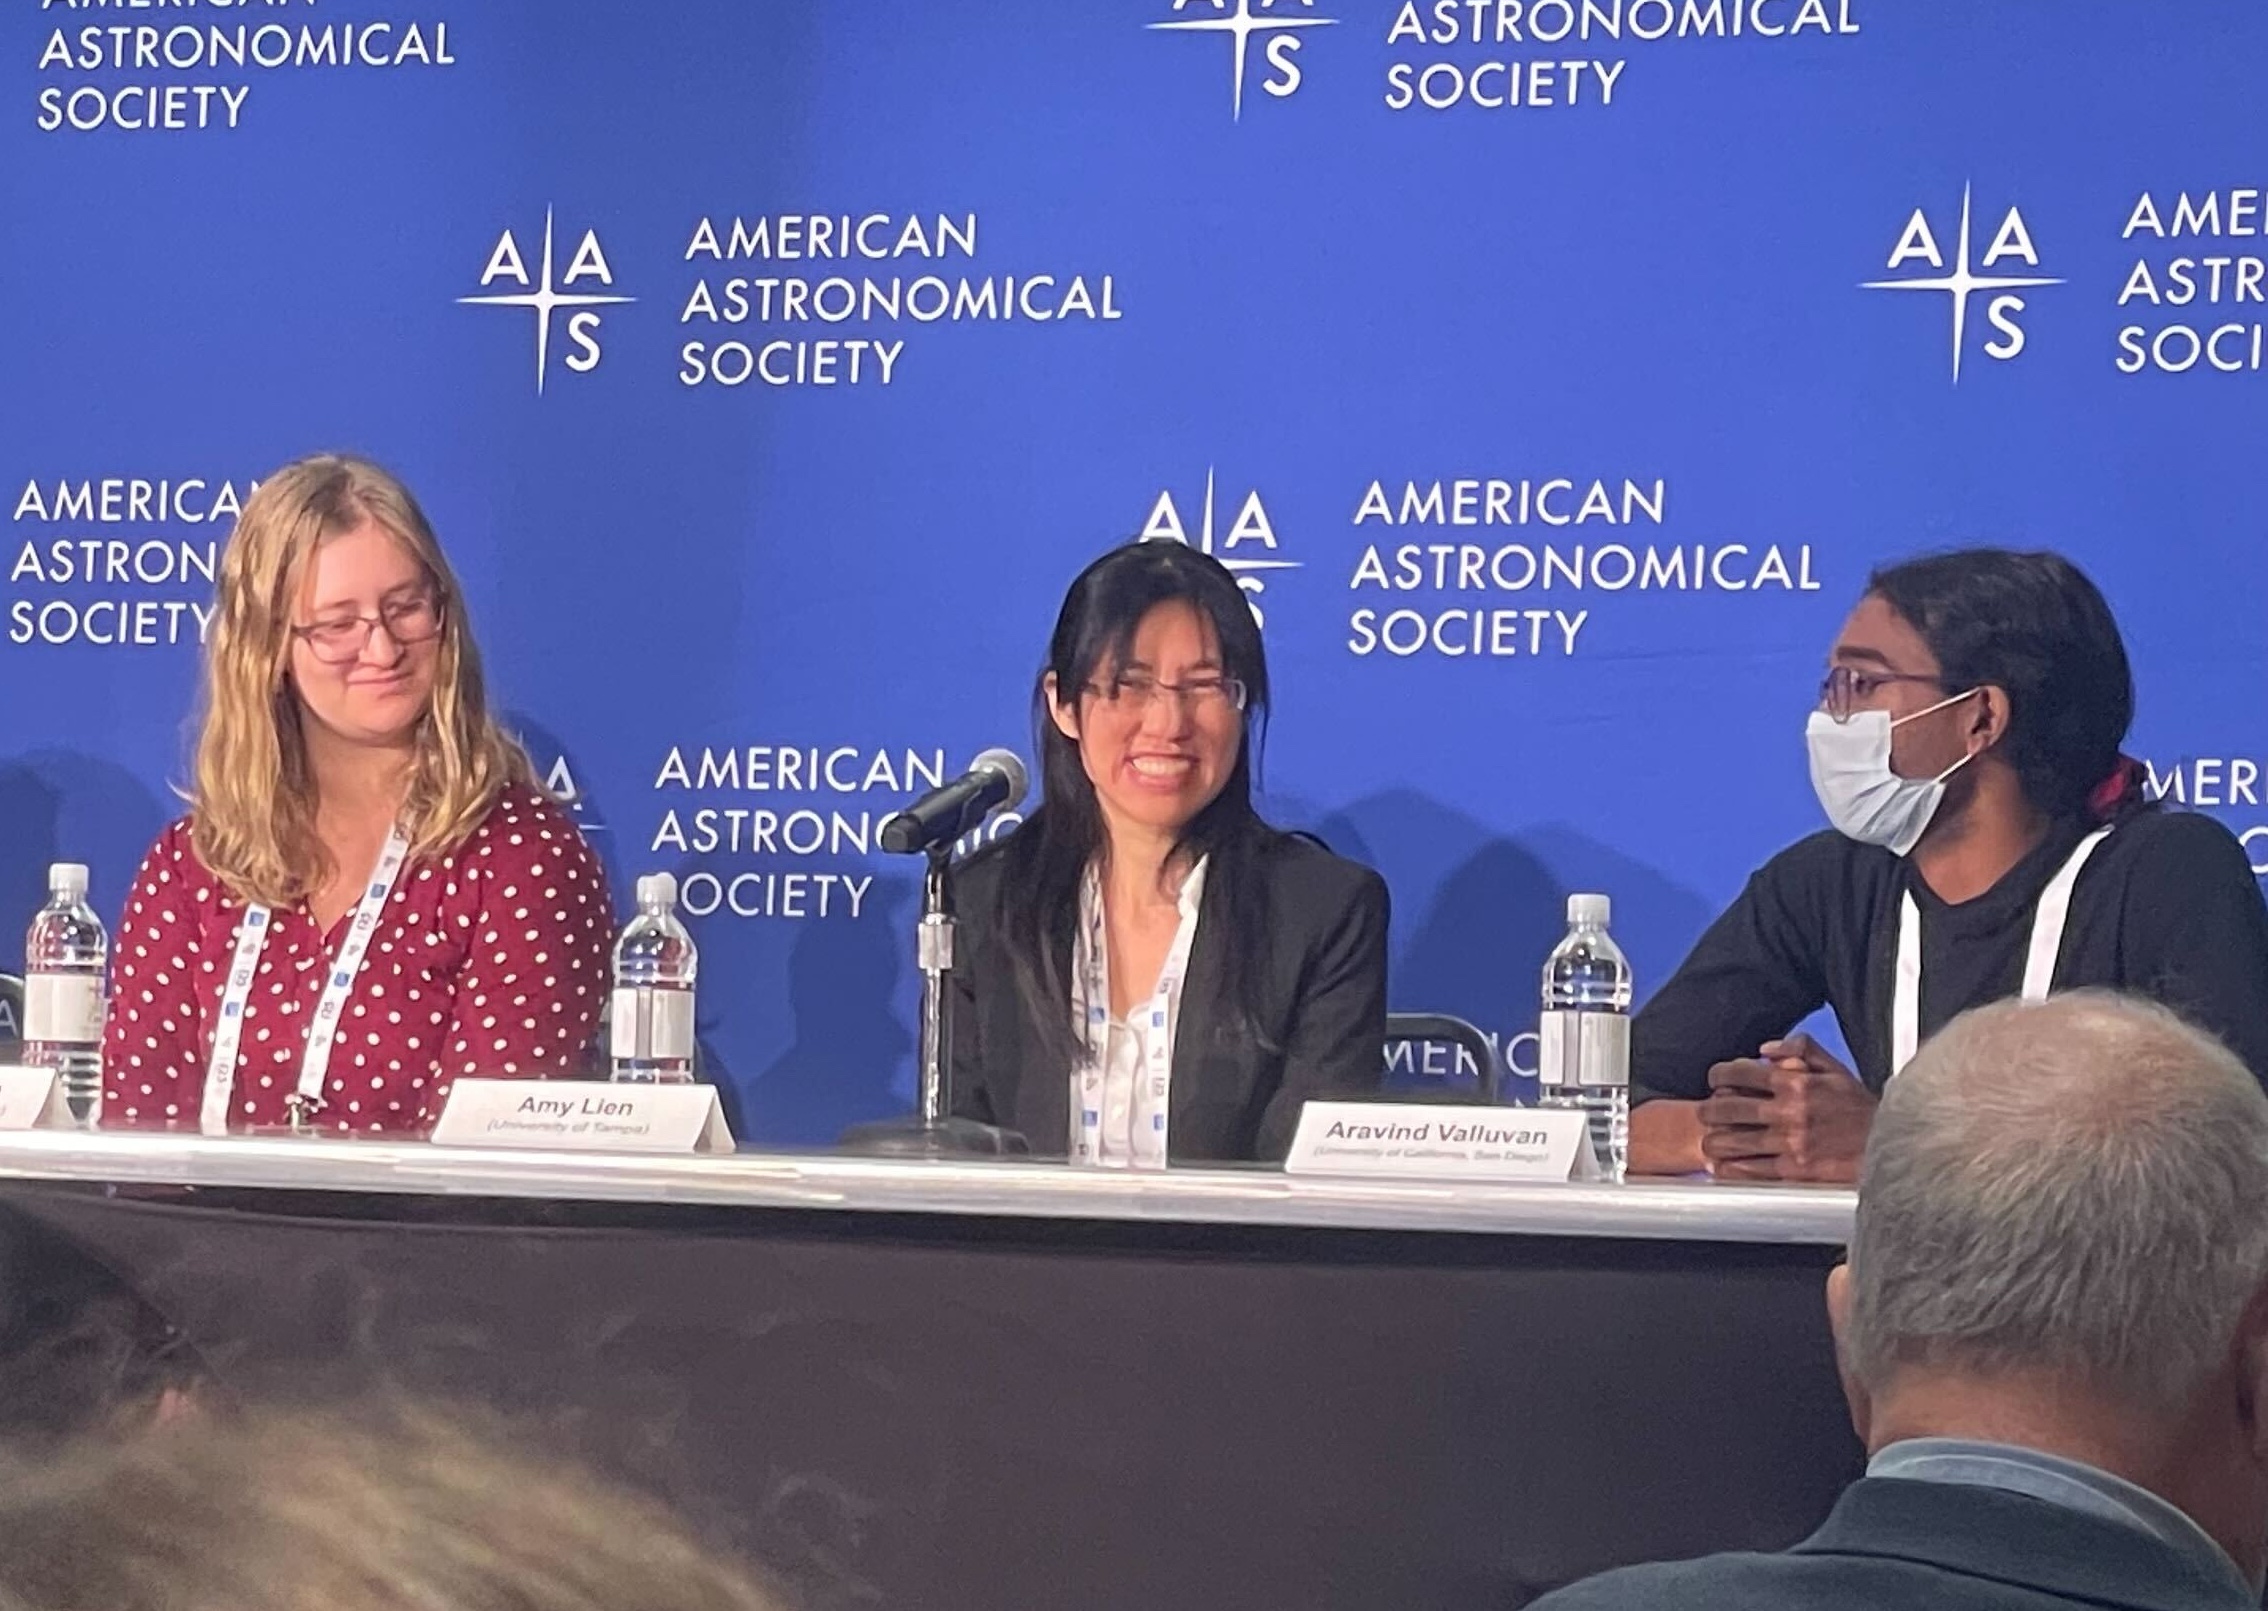 Photo of three women sitting at a press table with a blue background that reads American Astronomical Society